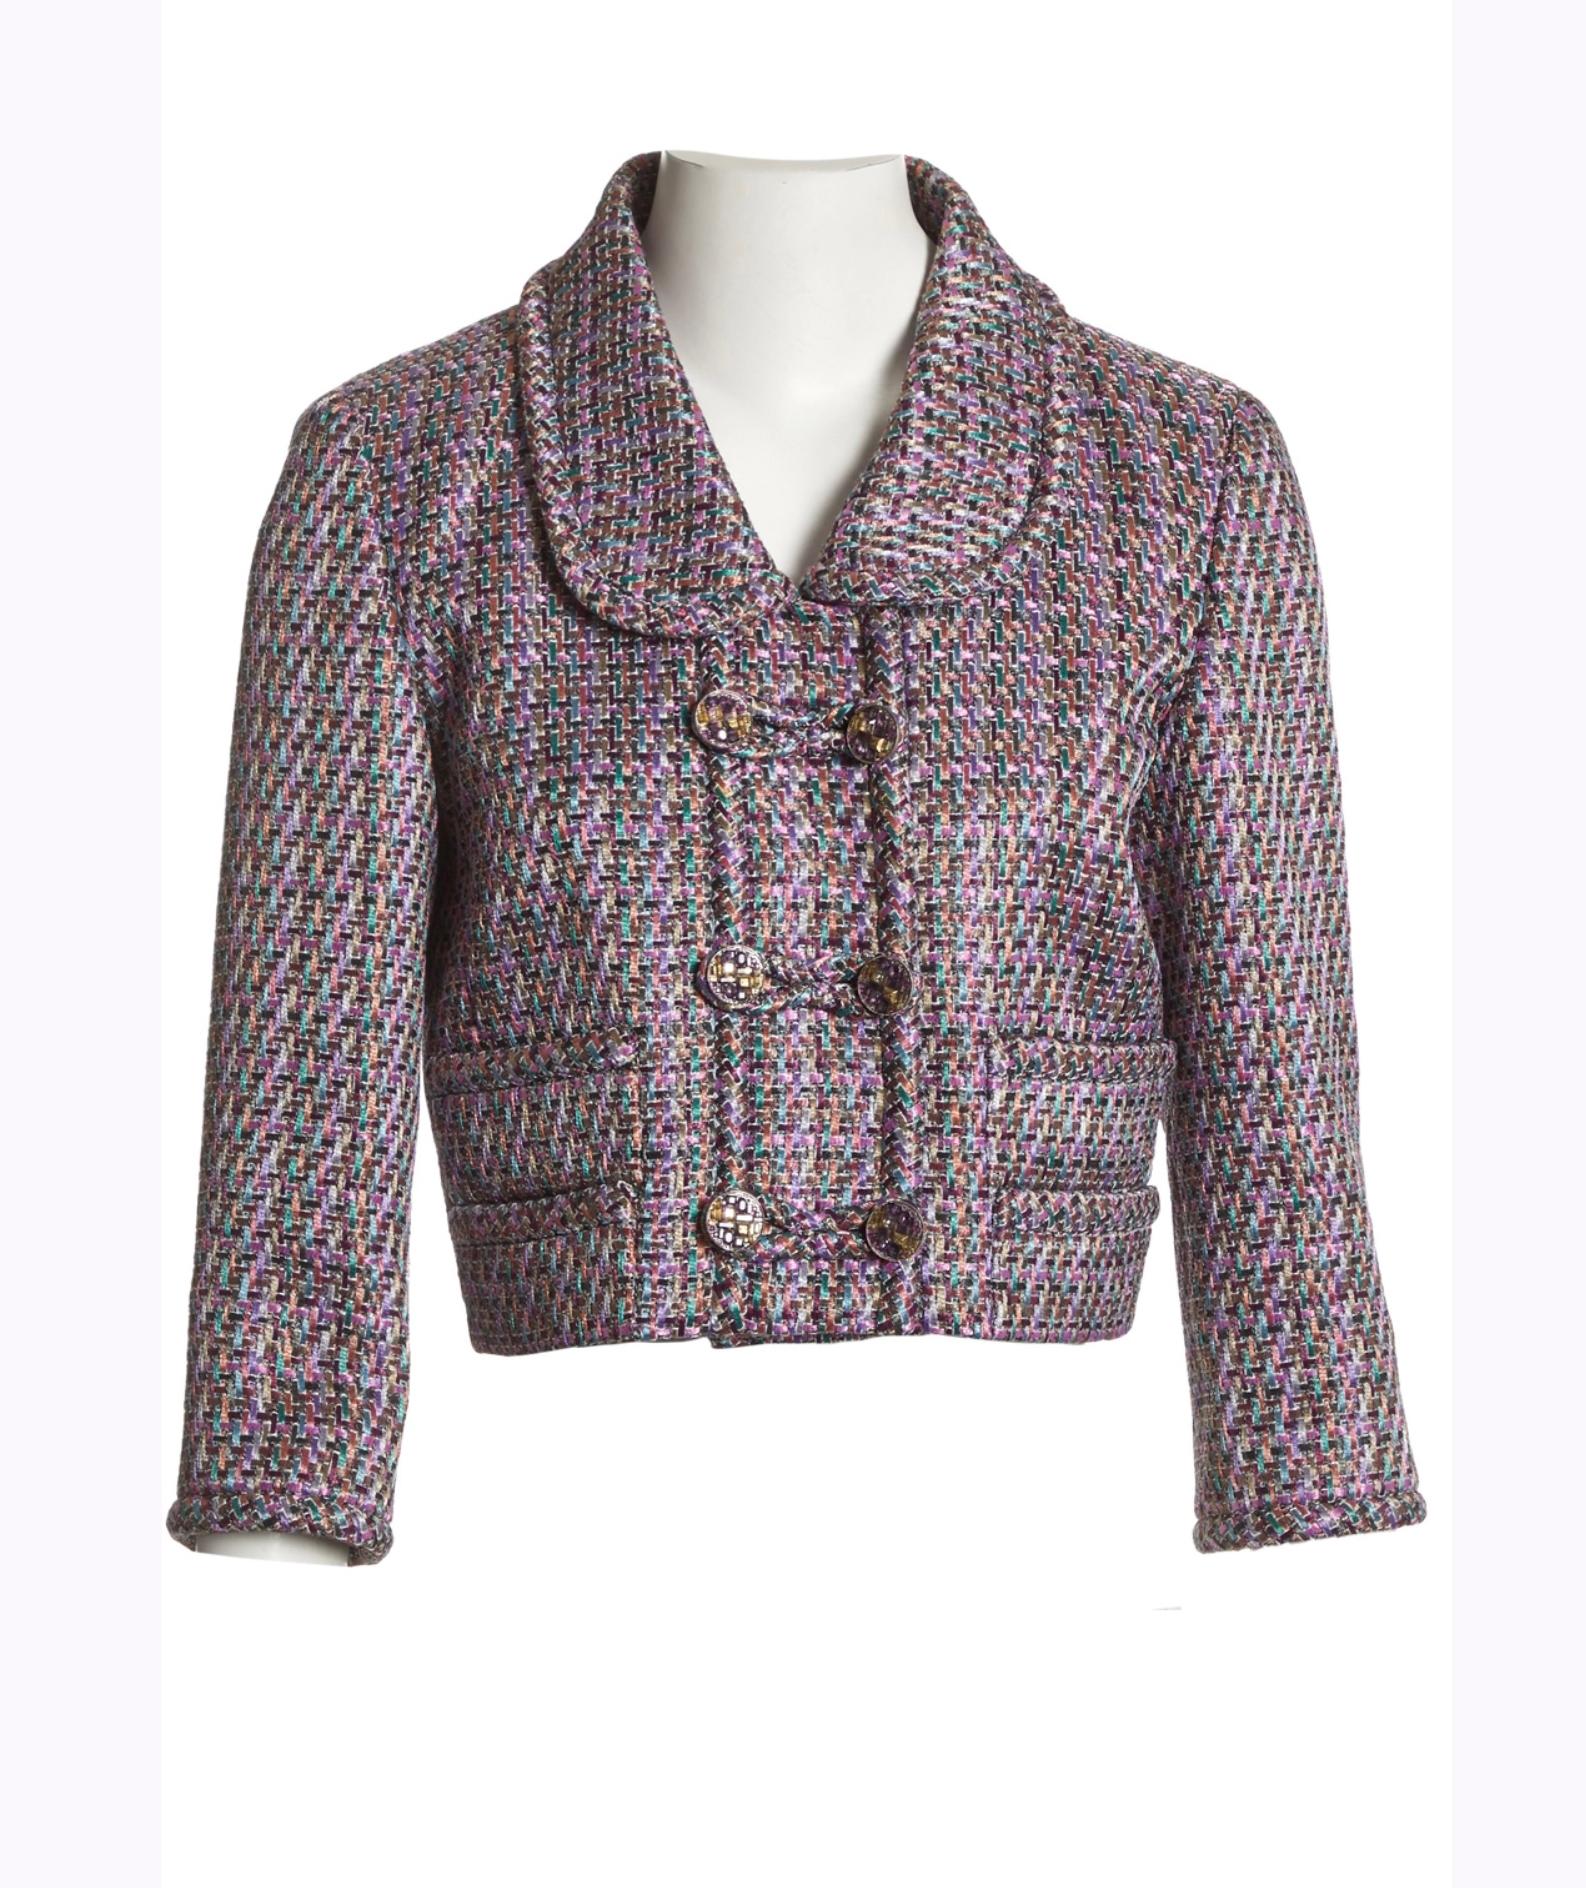 Stunning Chanel lavender lesage tweed jacket with CC logo buttons : from Paris / SALZBURG Collection
Size mark 38 FR. Condition is pristine, only tried once.